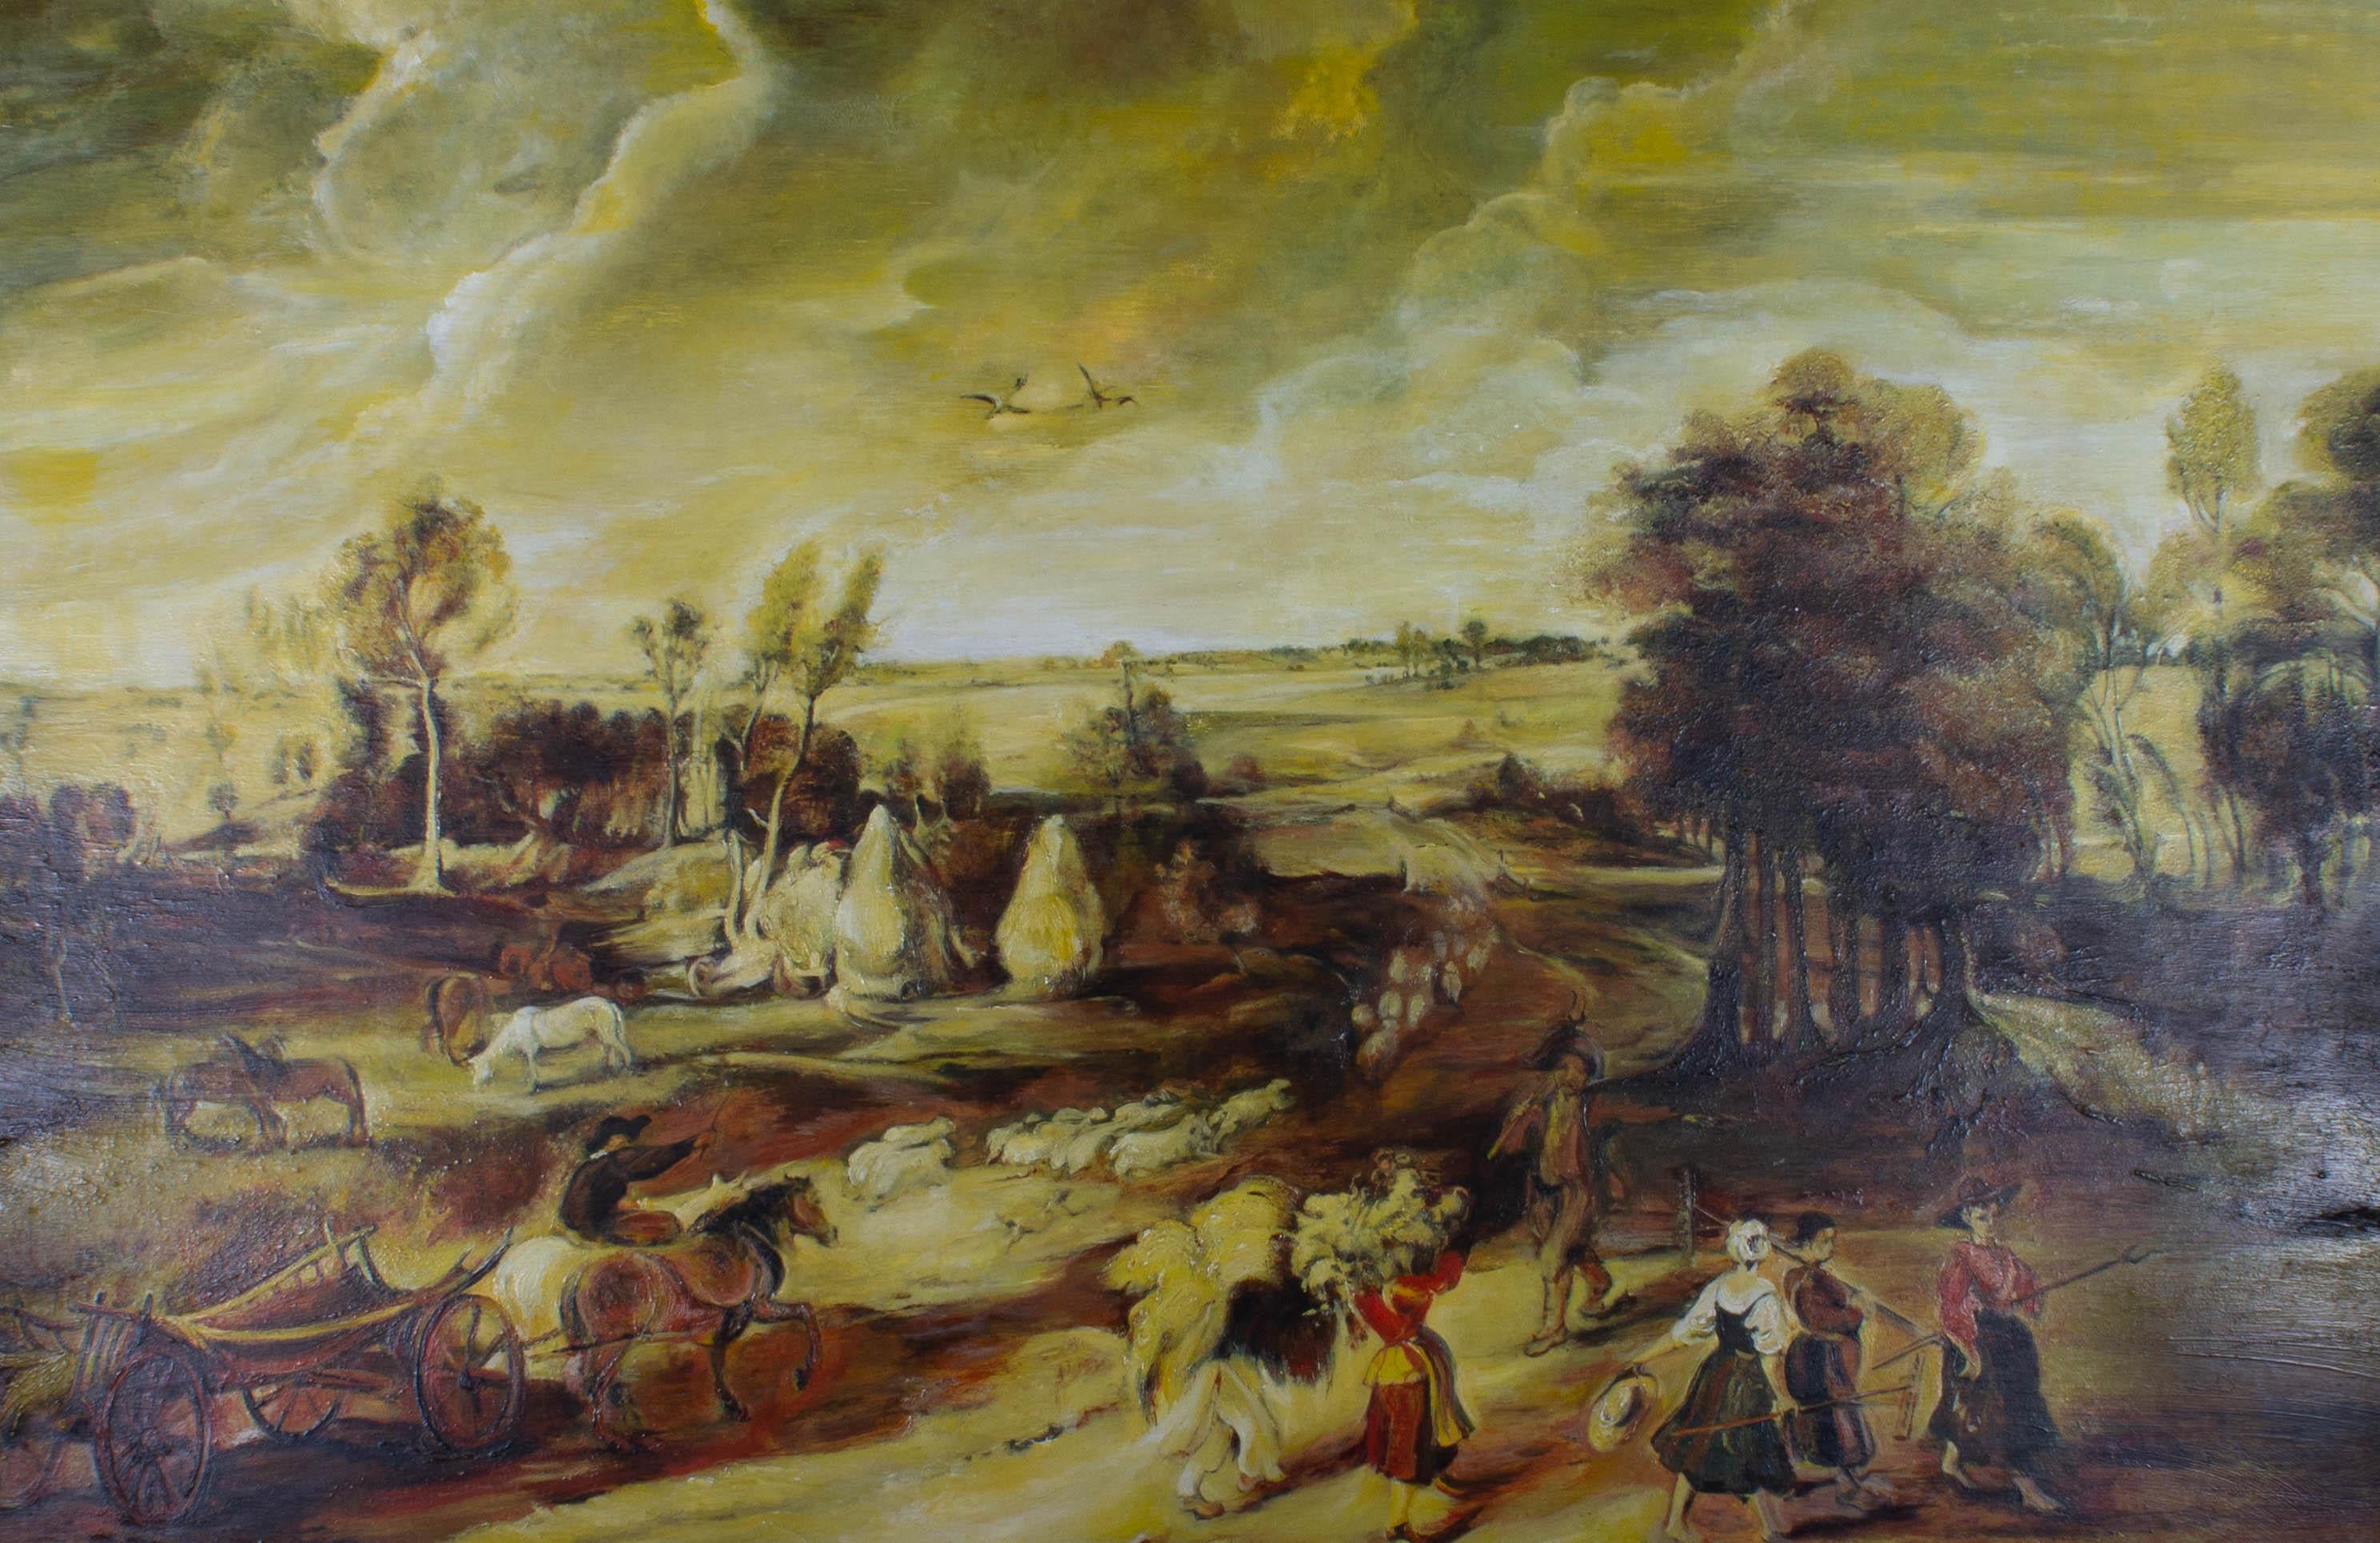 Sands after Rubens - Large 20th Century Oil, Peasants Returning from the Fields - Painting by S.M. Sands after Peter Paul Rubens